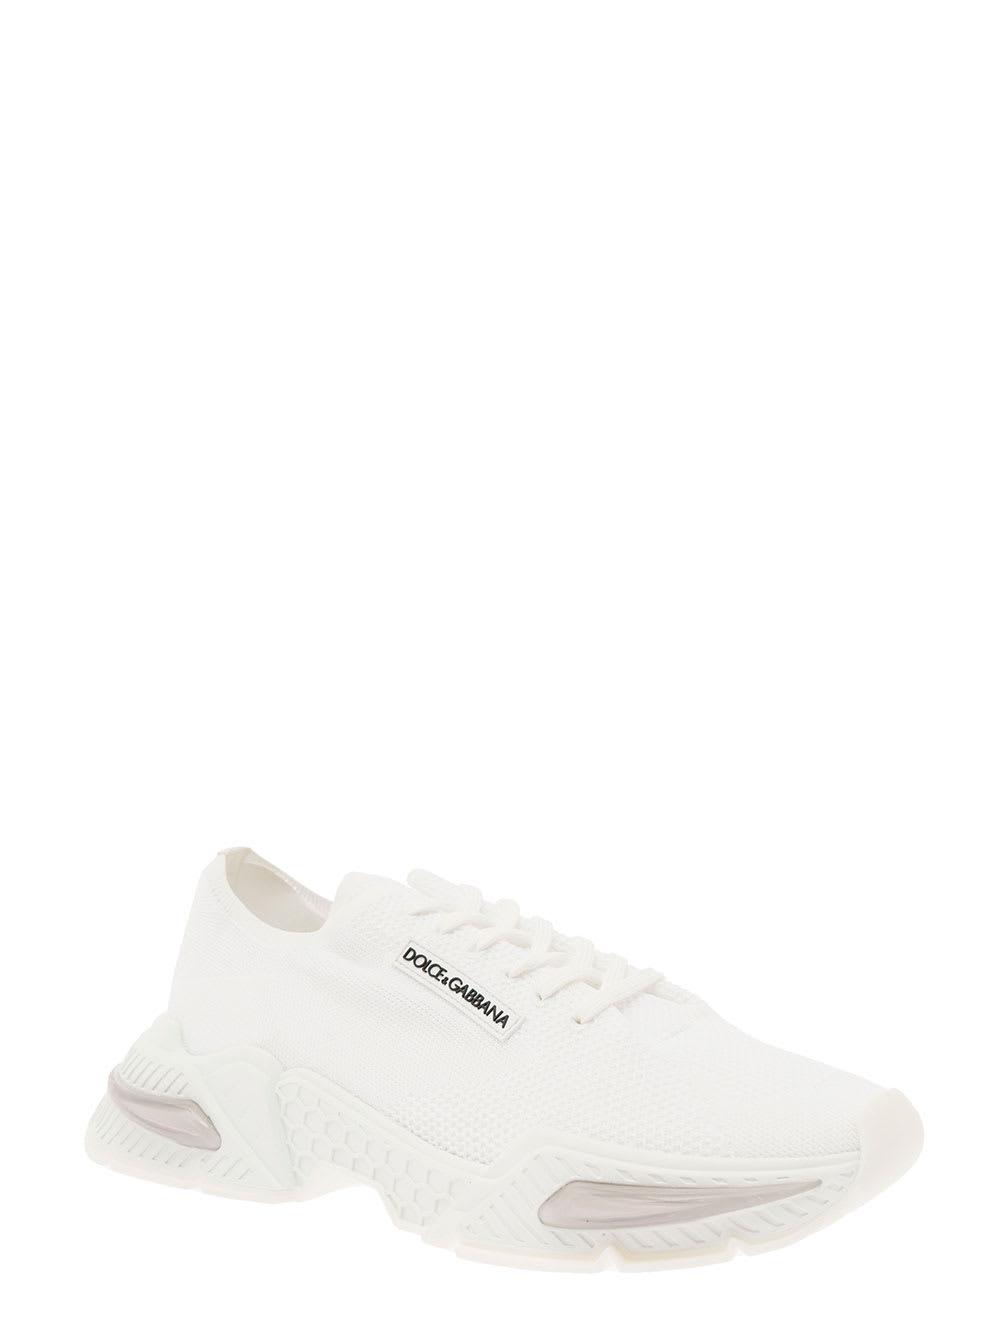 Dolce & Gabbana White Daymaster Sneakers In Stretch Knit Man for Men | Lyst